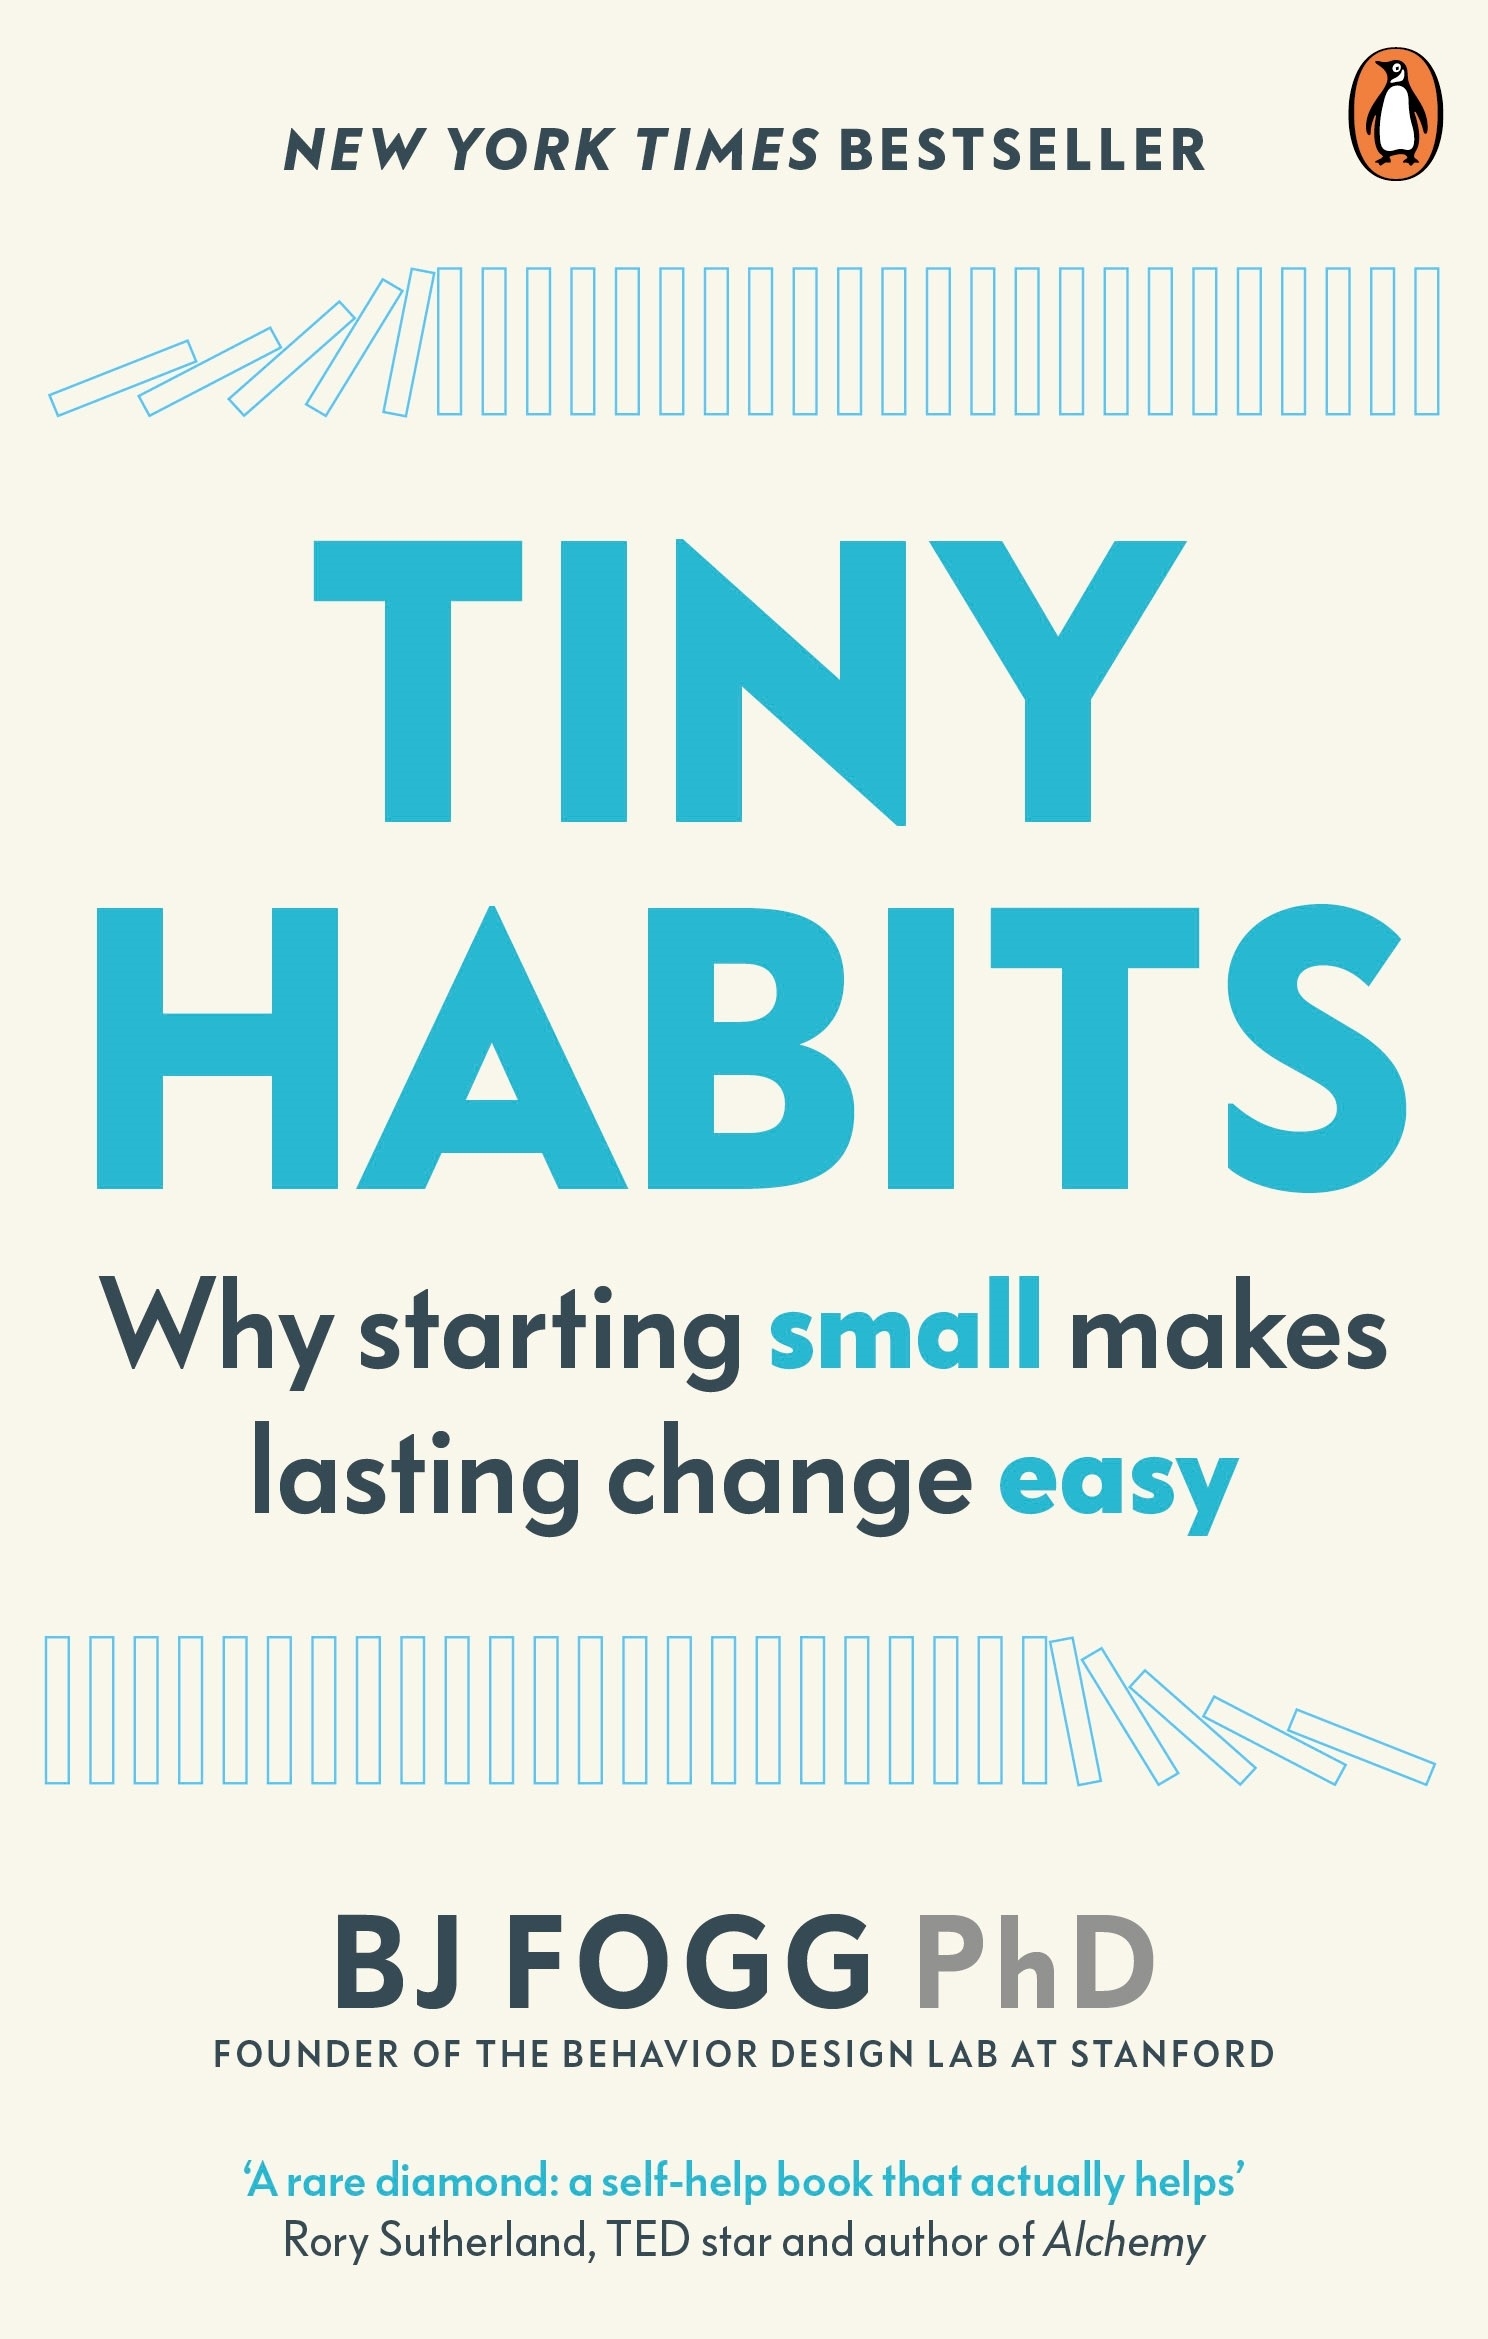 the tiny small habits that change everything